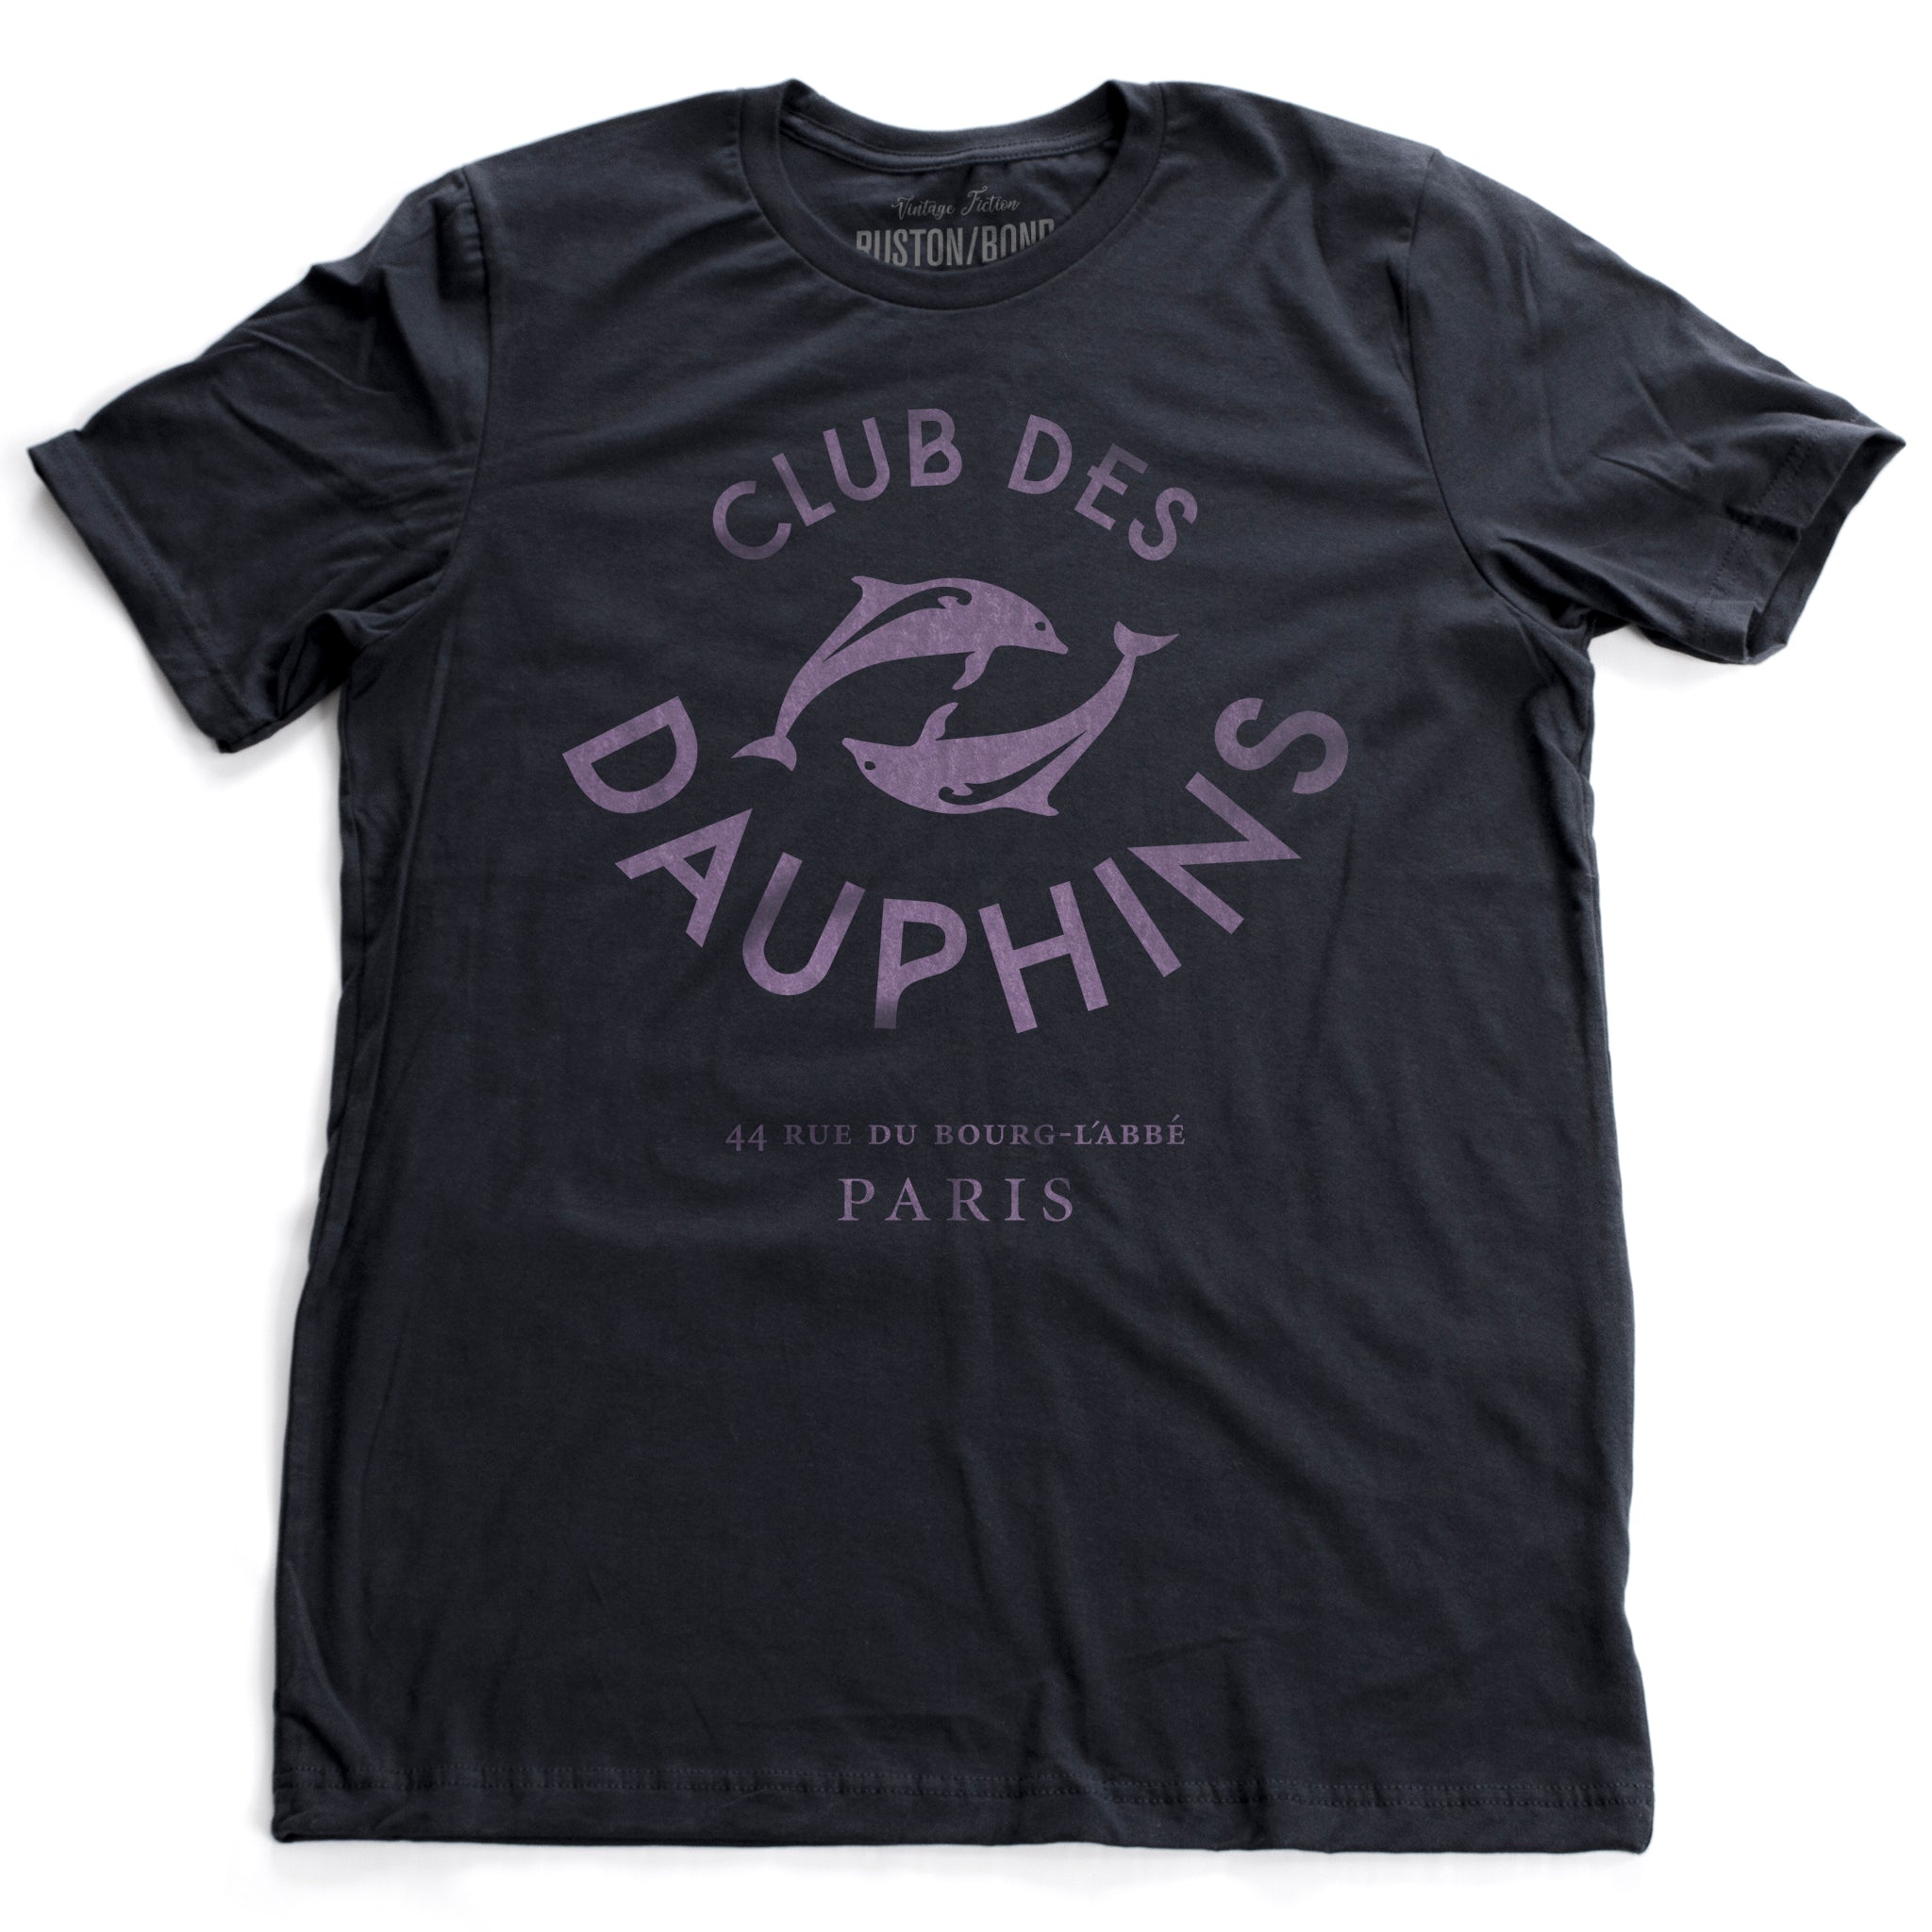 A vintage-inspired fashion t-shirt featuring a retro graphic of two dolphins, surrounded by the words “CLUB DES DAUPHINS,” or Dolphin Club in French, a fictitious club in Paris, France. By fashion brand Wolfsaint. From Wolfsaint.net